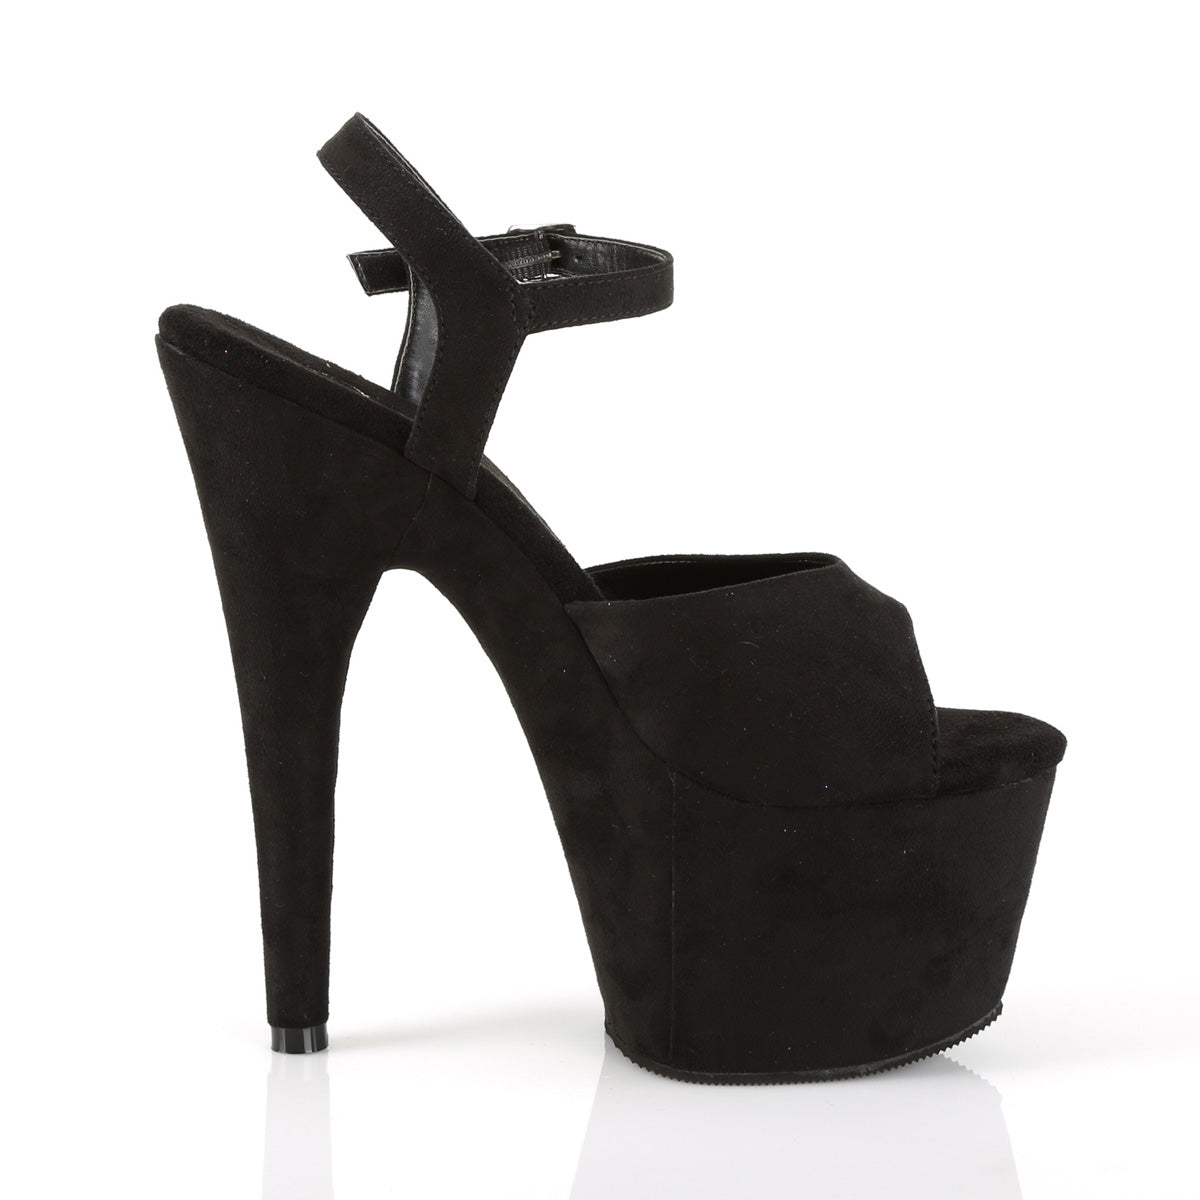 ADORE-709FS Pleaser 7 Inch Heel Black Pole Dancing Shoes-Pleaser- Sexy Shoes Fetish Heels